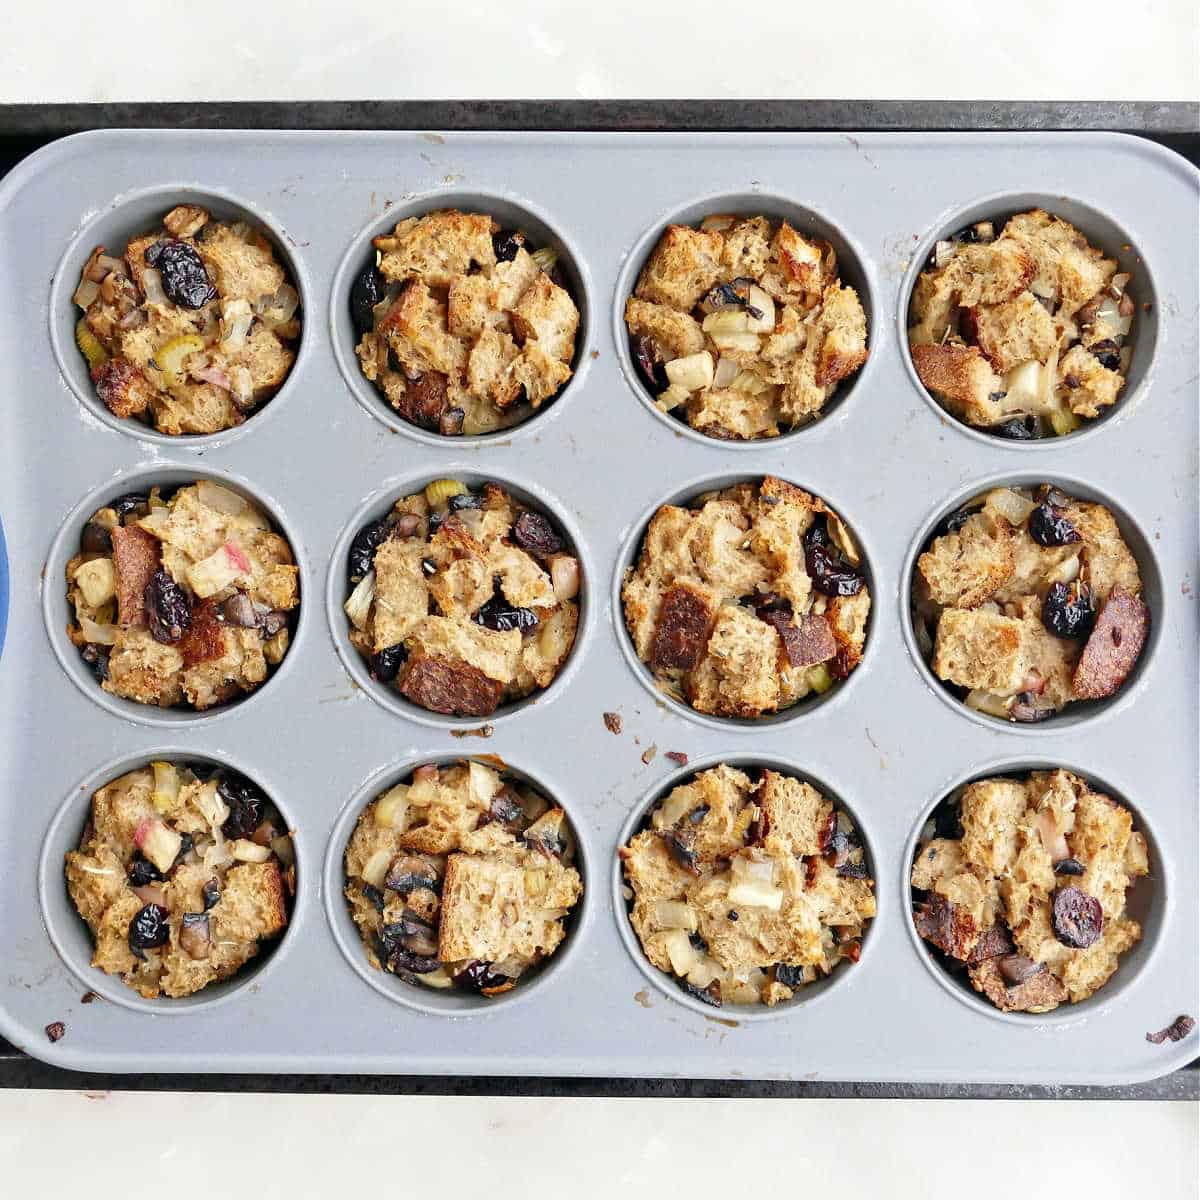 stuffing muffins in a muffin tray after cooking in the oven